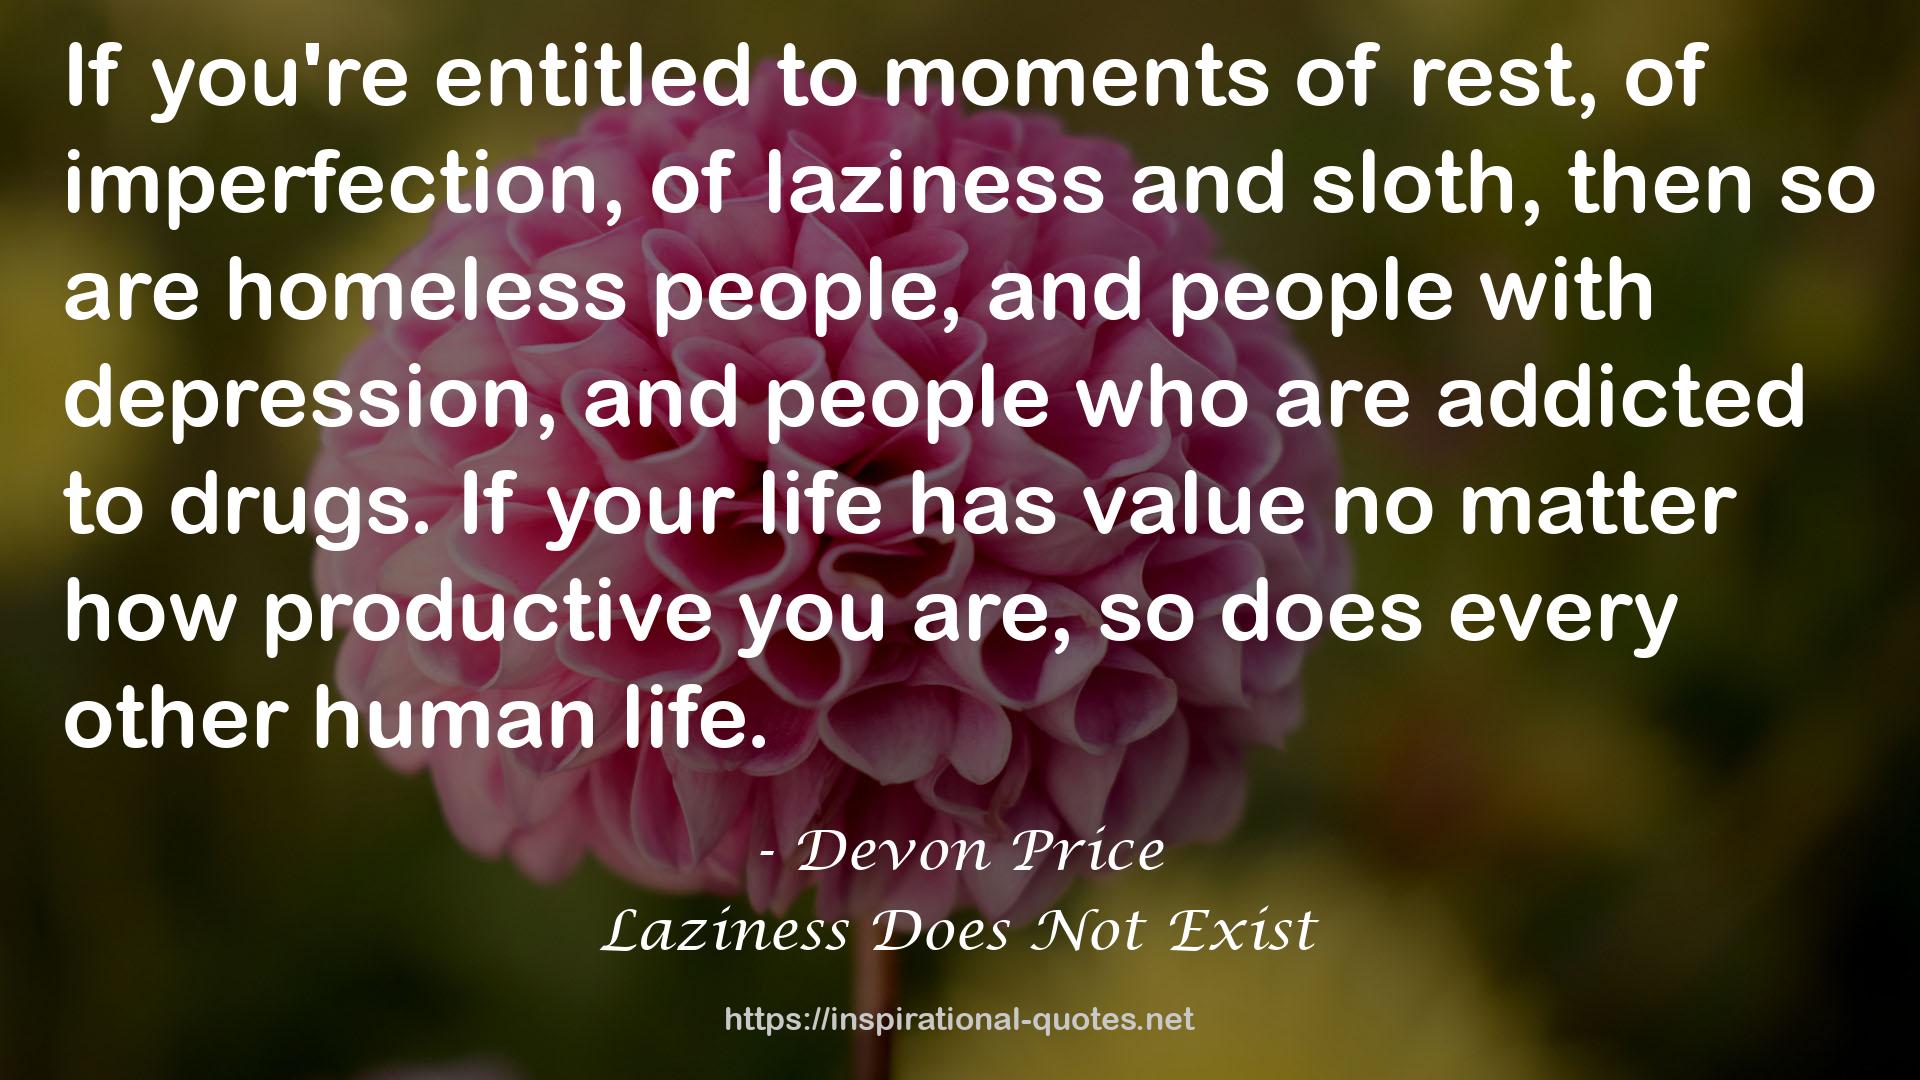 Laziness Does Not Exist QUOTES